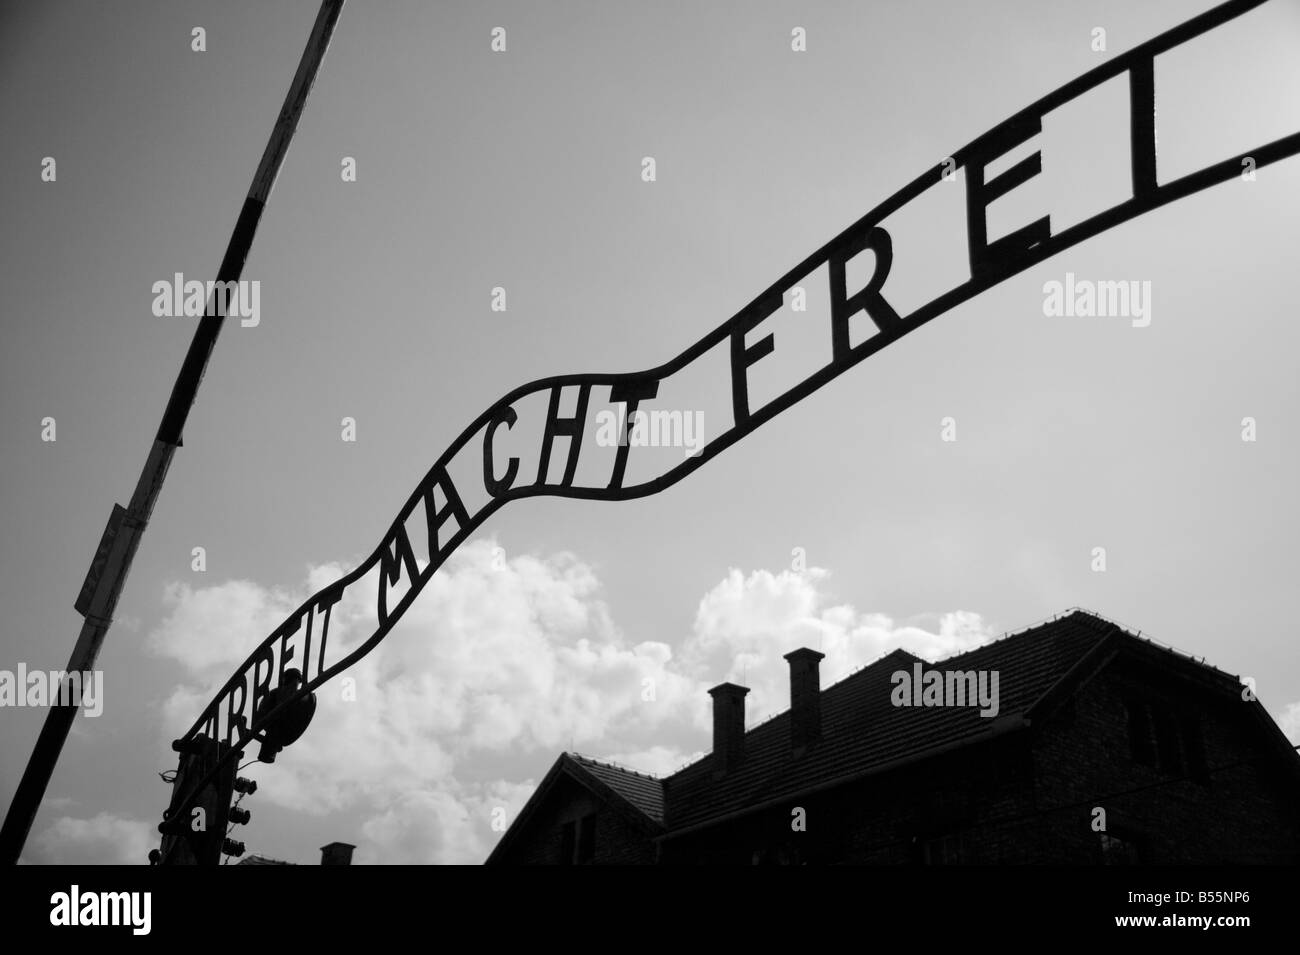 The infamous writing 'Arbeit macht frei' (='Work Brings Freedom') over the entrance gate in former concentration camp Auschwitz Stock Photo